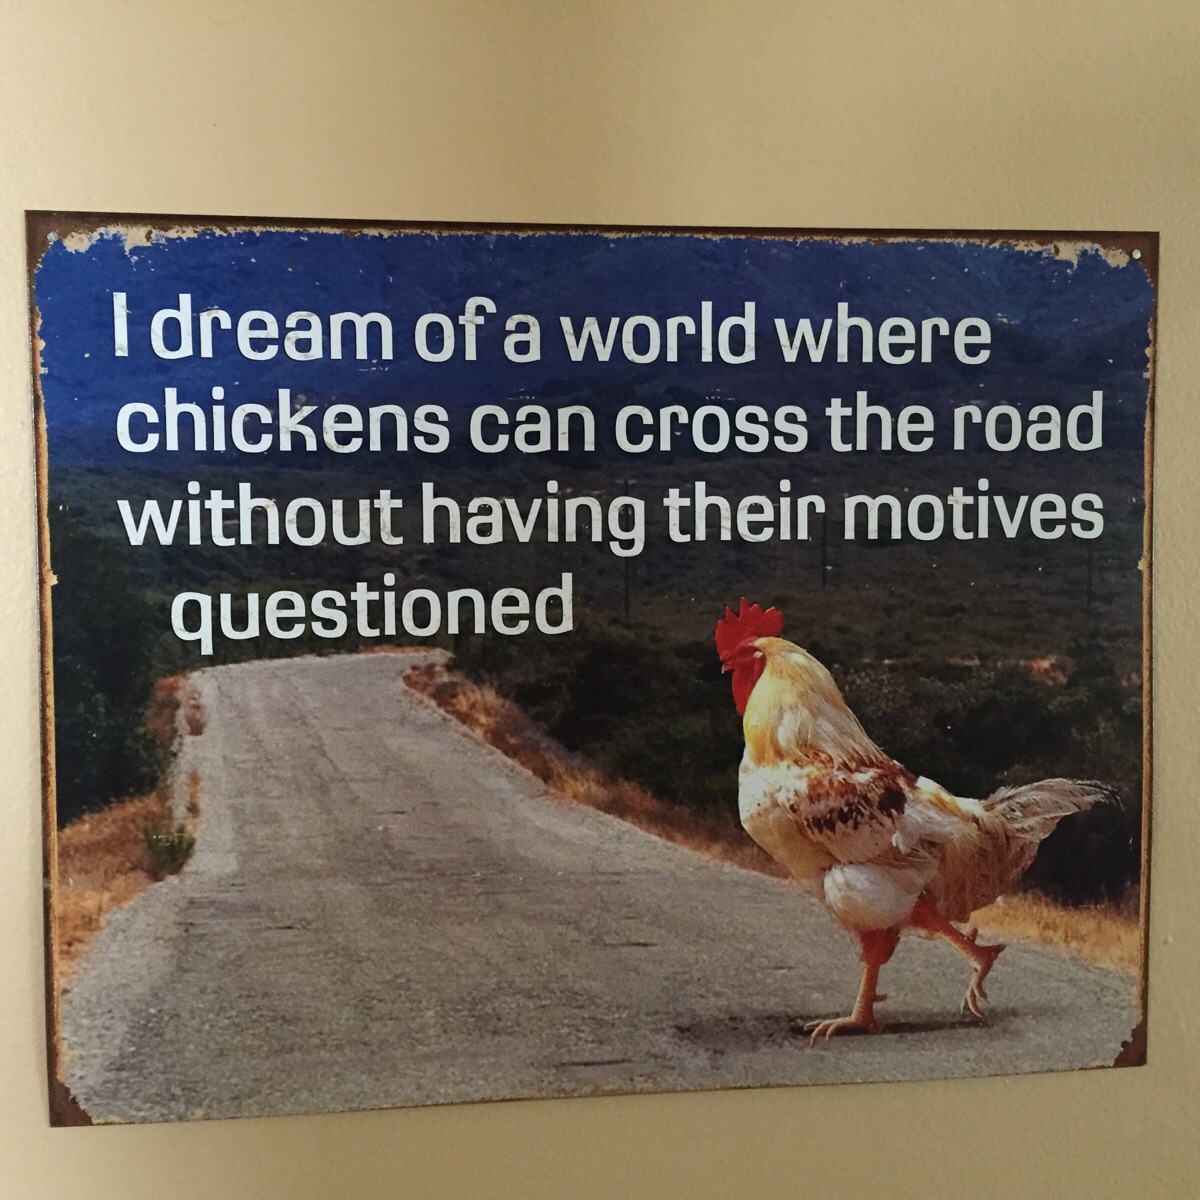 Never again ask why chickens cross the road. - RealFunny